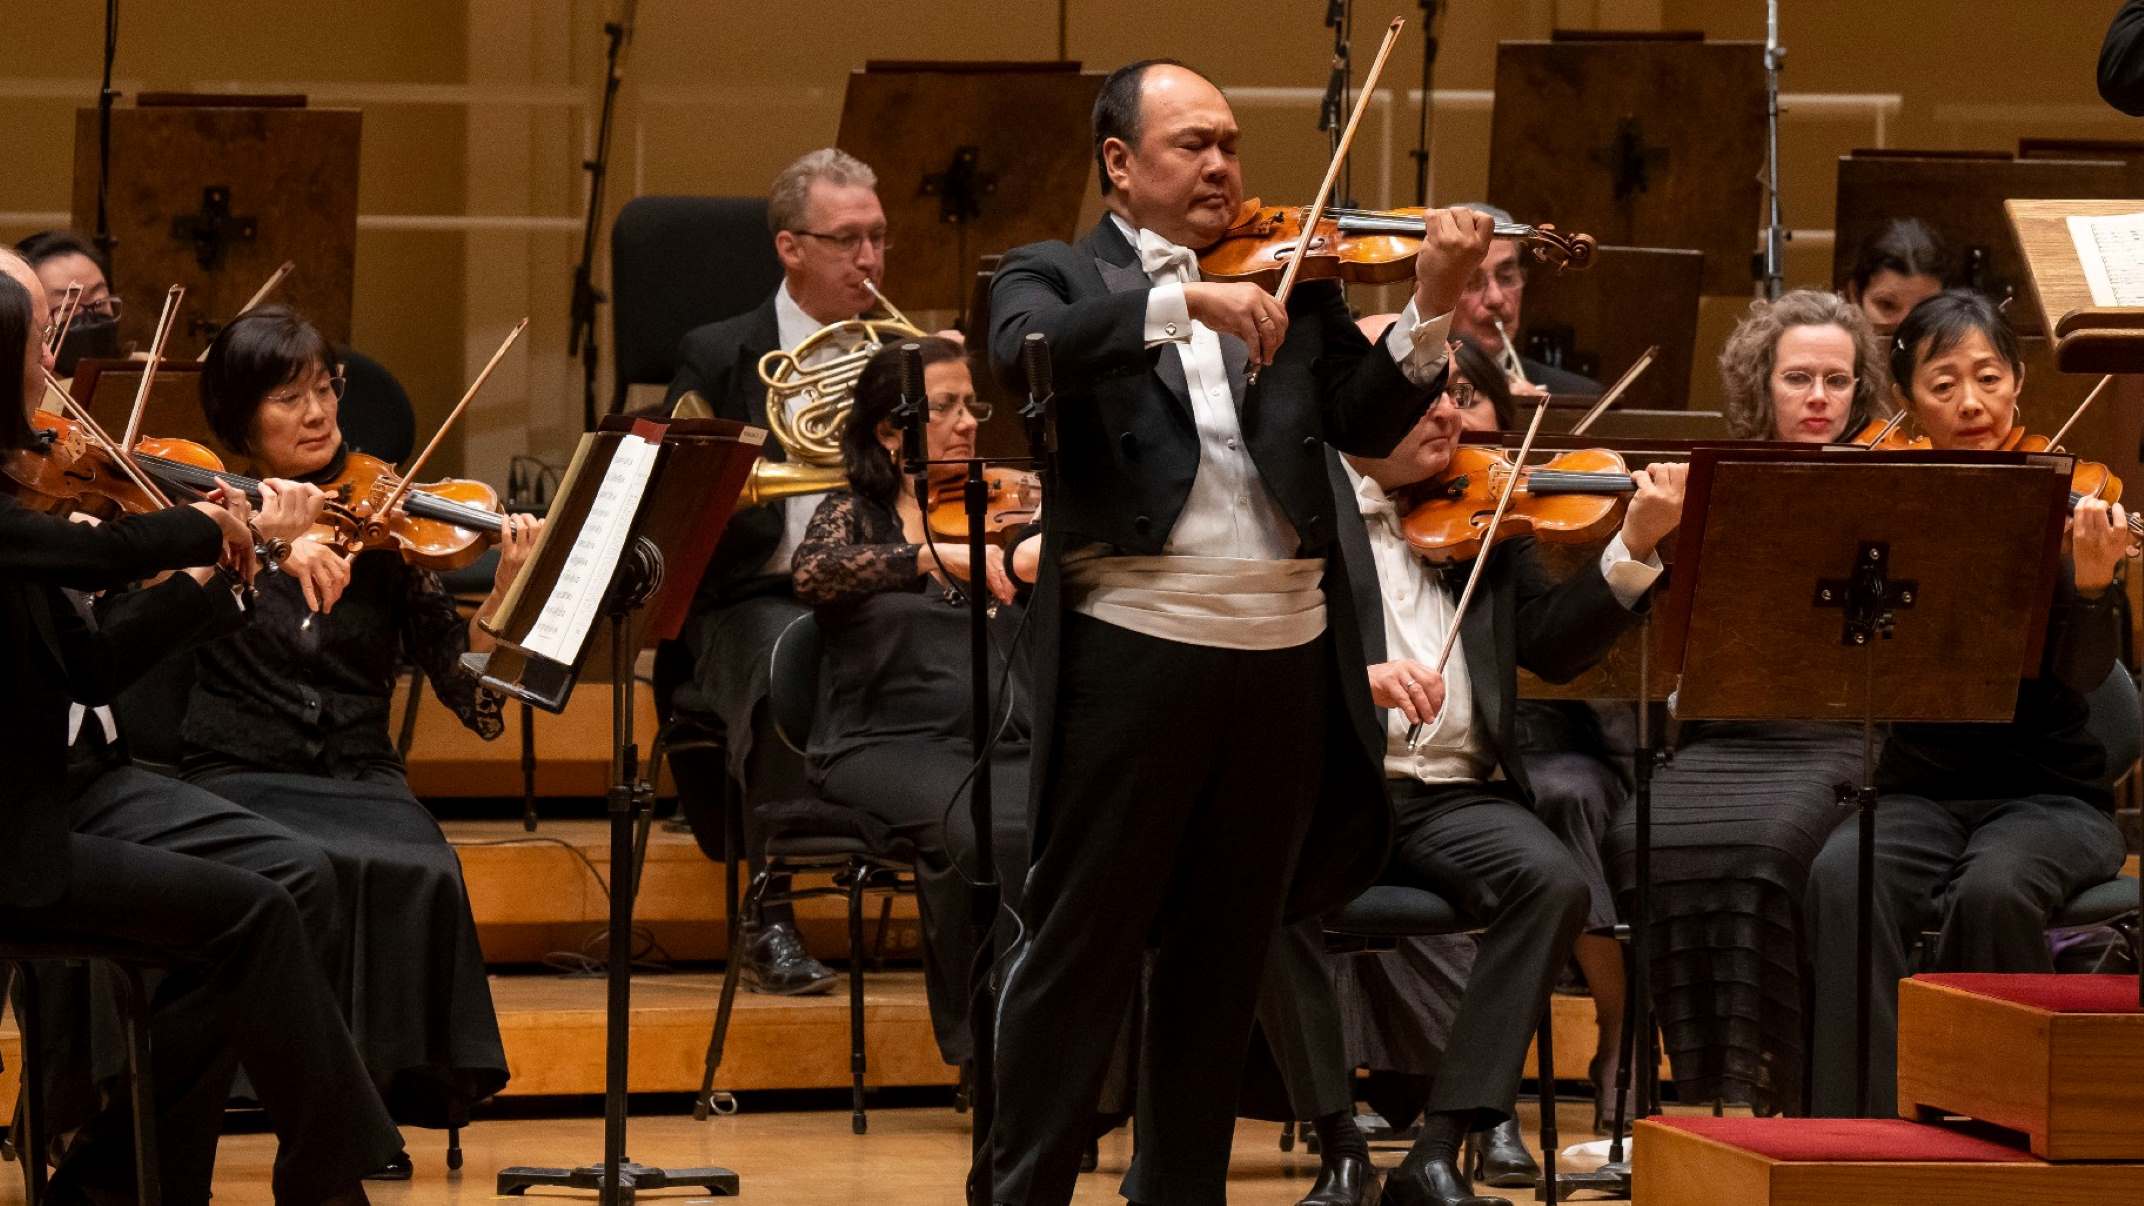 In A Symphony Orchestra What Instrument Is Played By The Concertmaster?